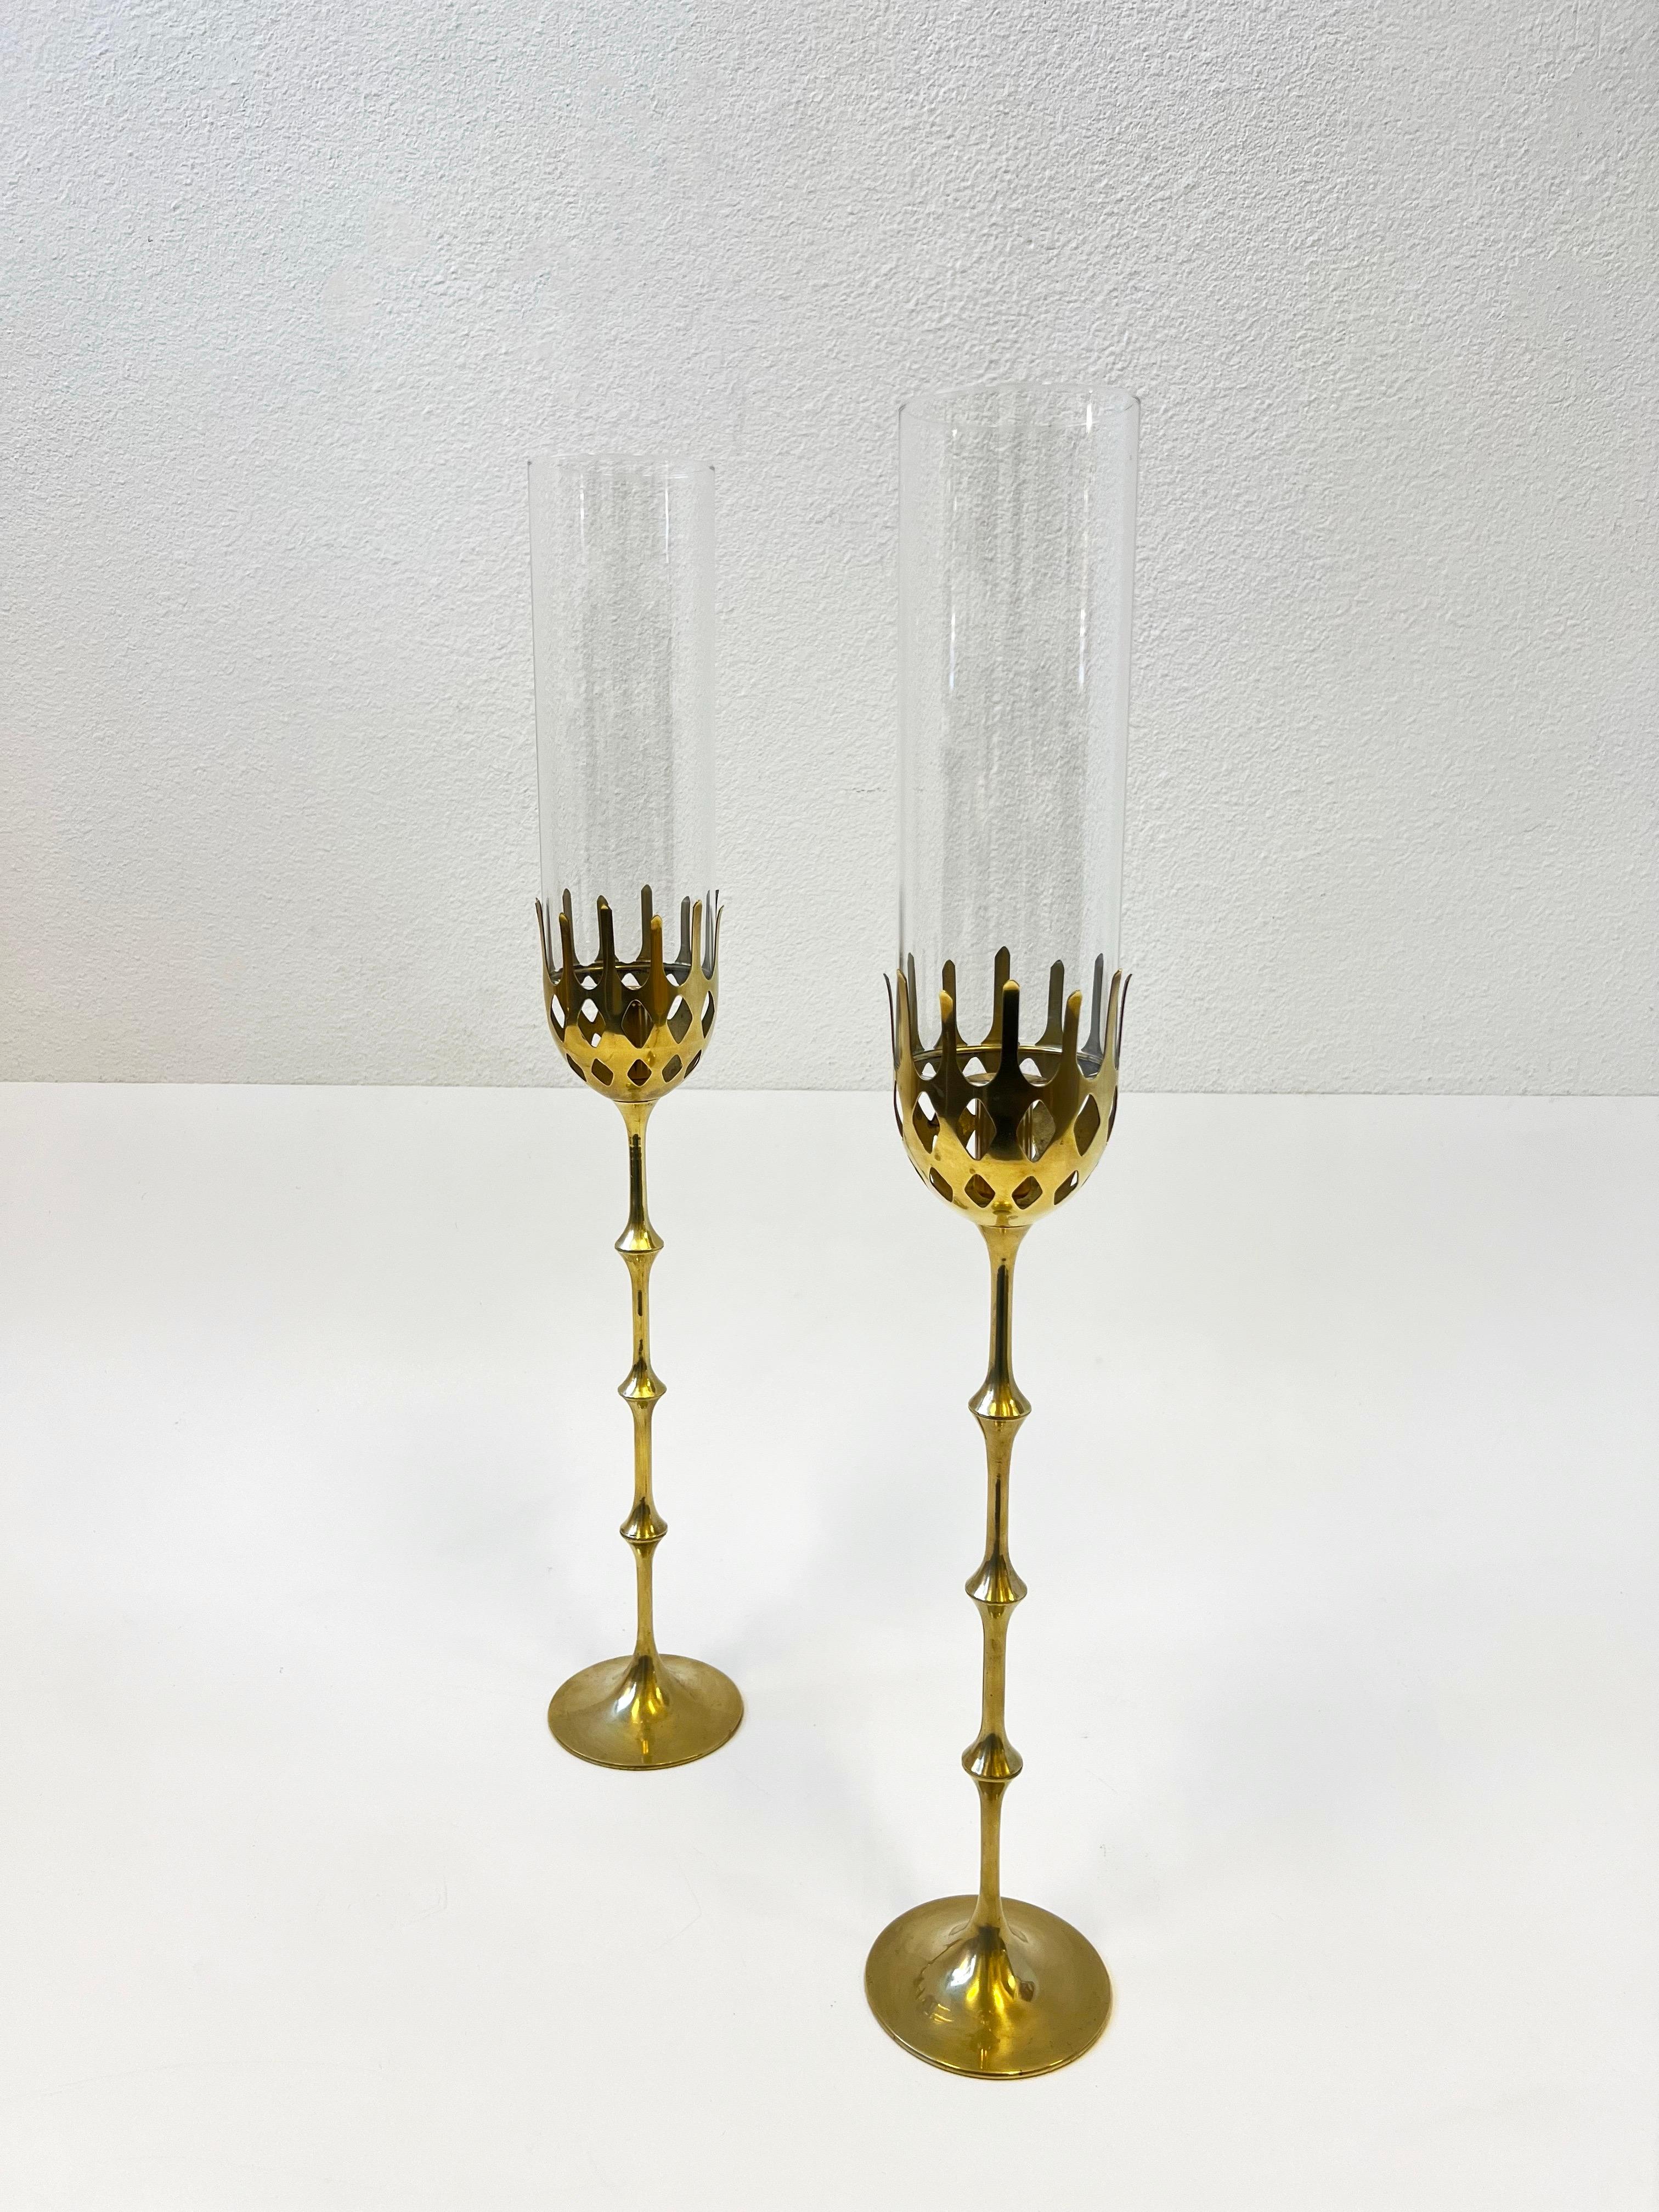 1970’s Pair of solid brass and glass candle holders by Bijørn Wiinblad for Bambercer. 
They are marked Exclusively for Bambercer. 
New hurricanes glass shades. 
The brass is not lacquered shows minor wear consistent with age. 

Measurements: 
27”